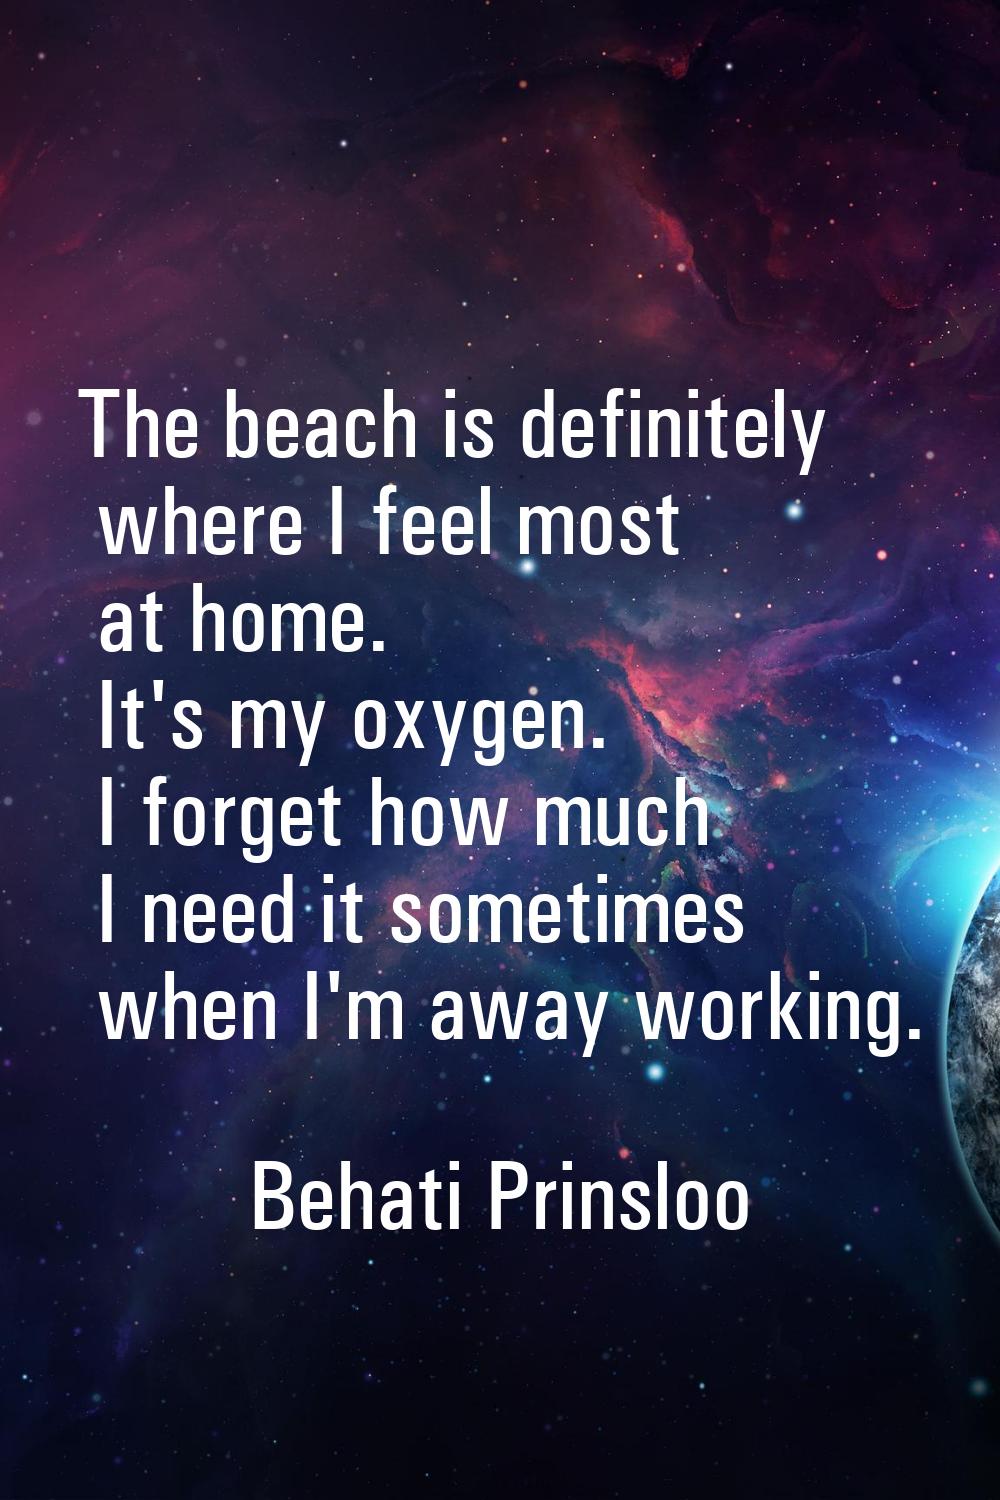 The beach is definitely where I feel most at home. It's my oxygen. I forget how much I need it some